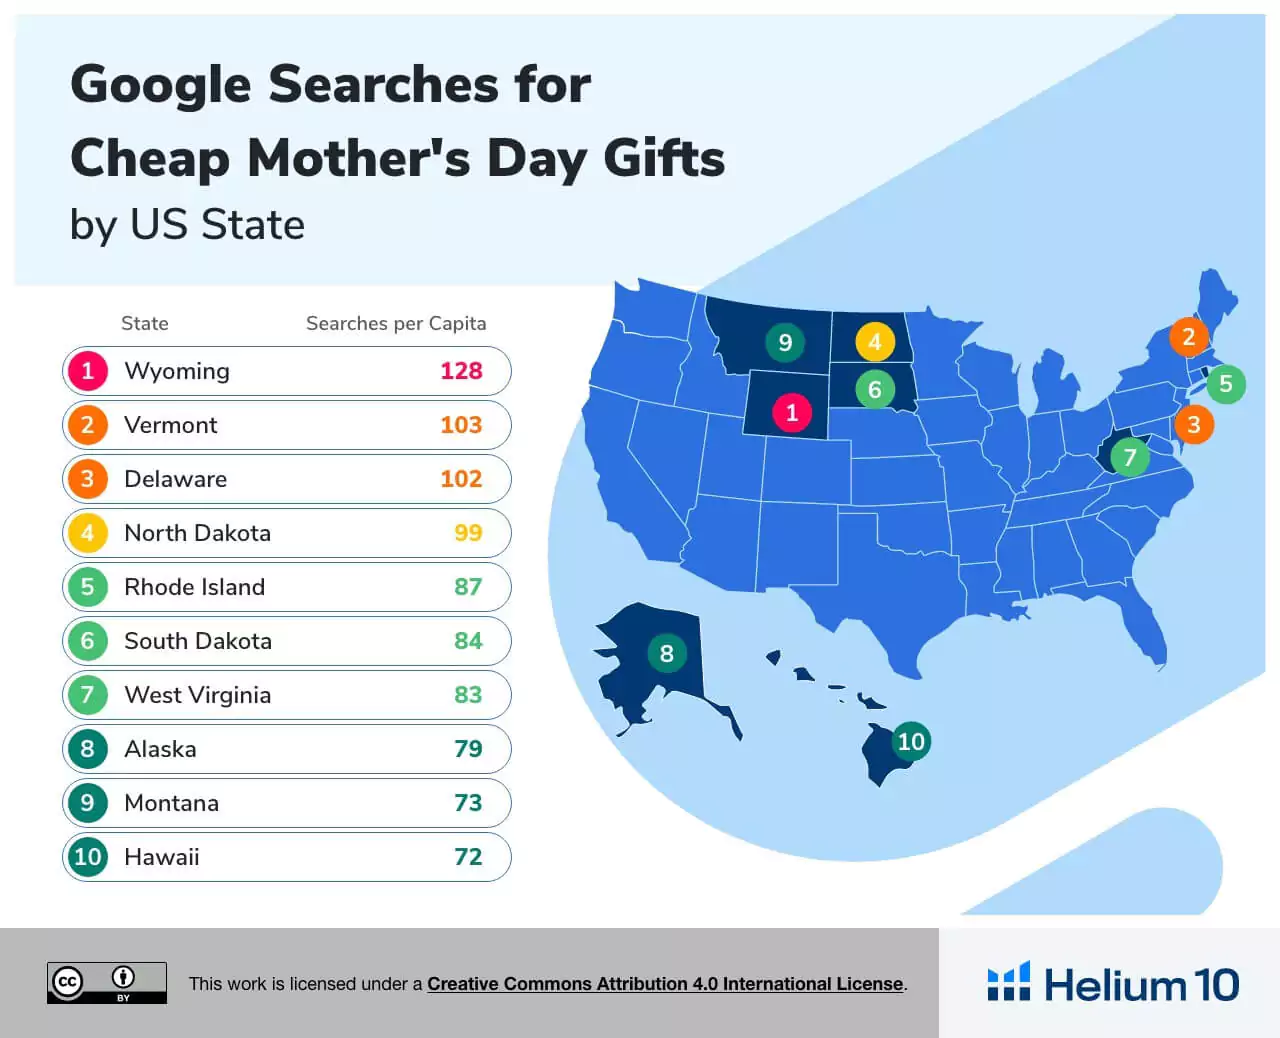 Mothers Day gift searches by US state